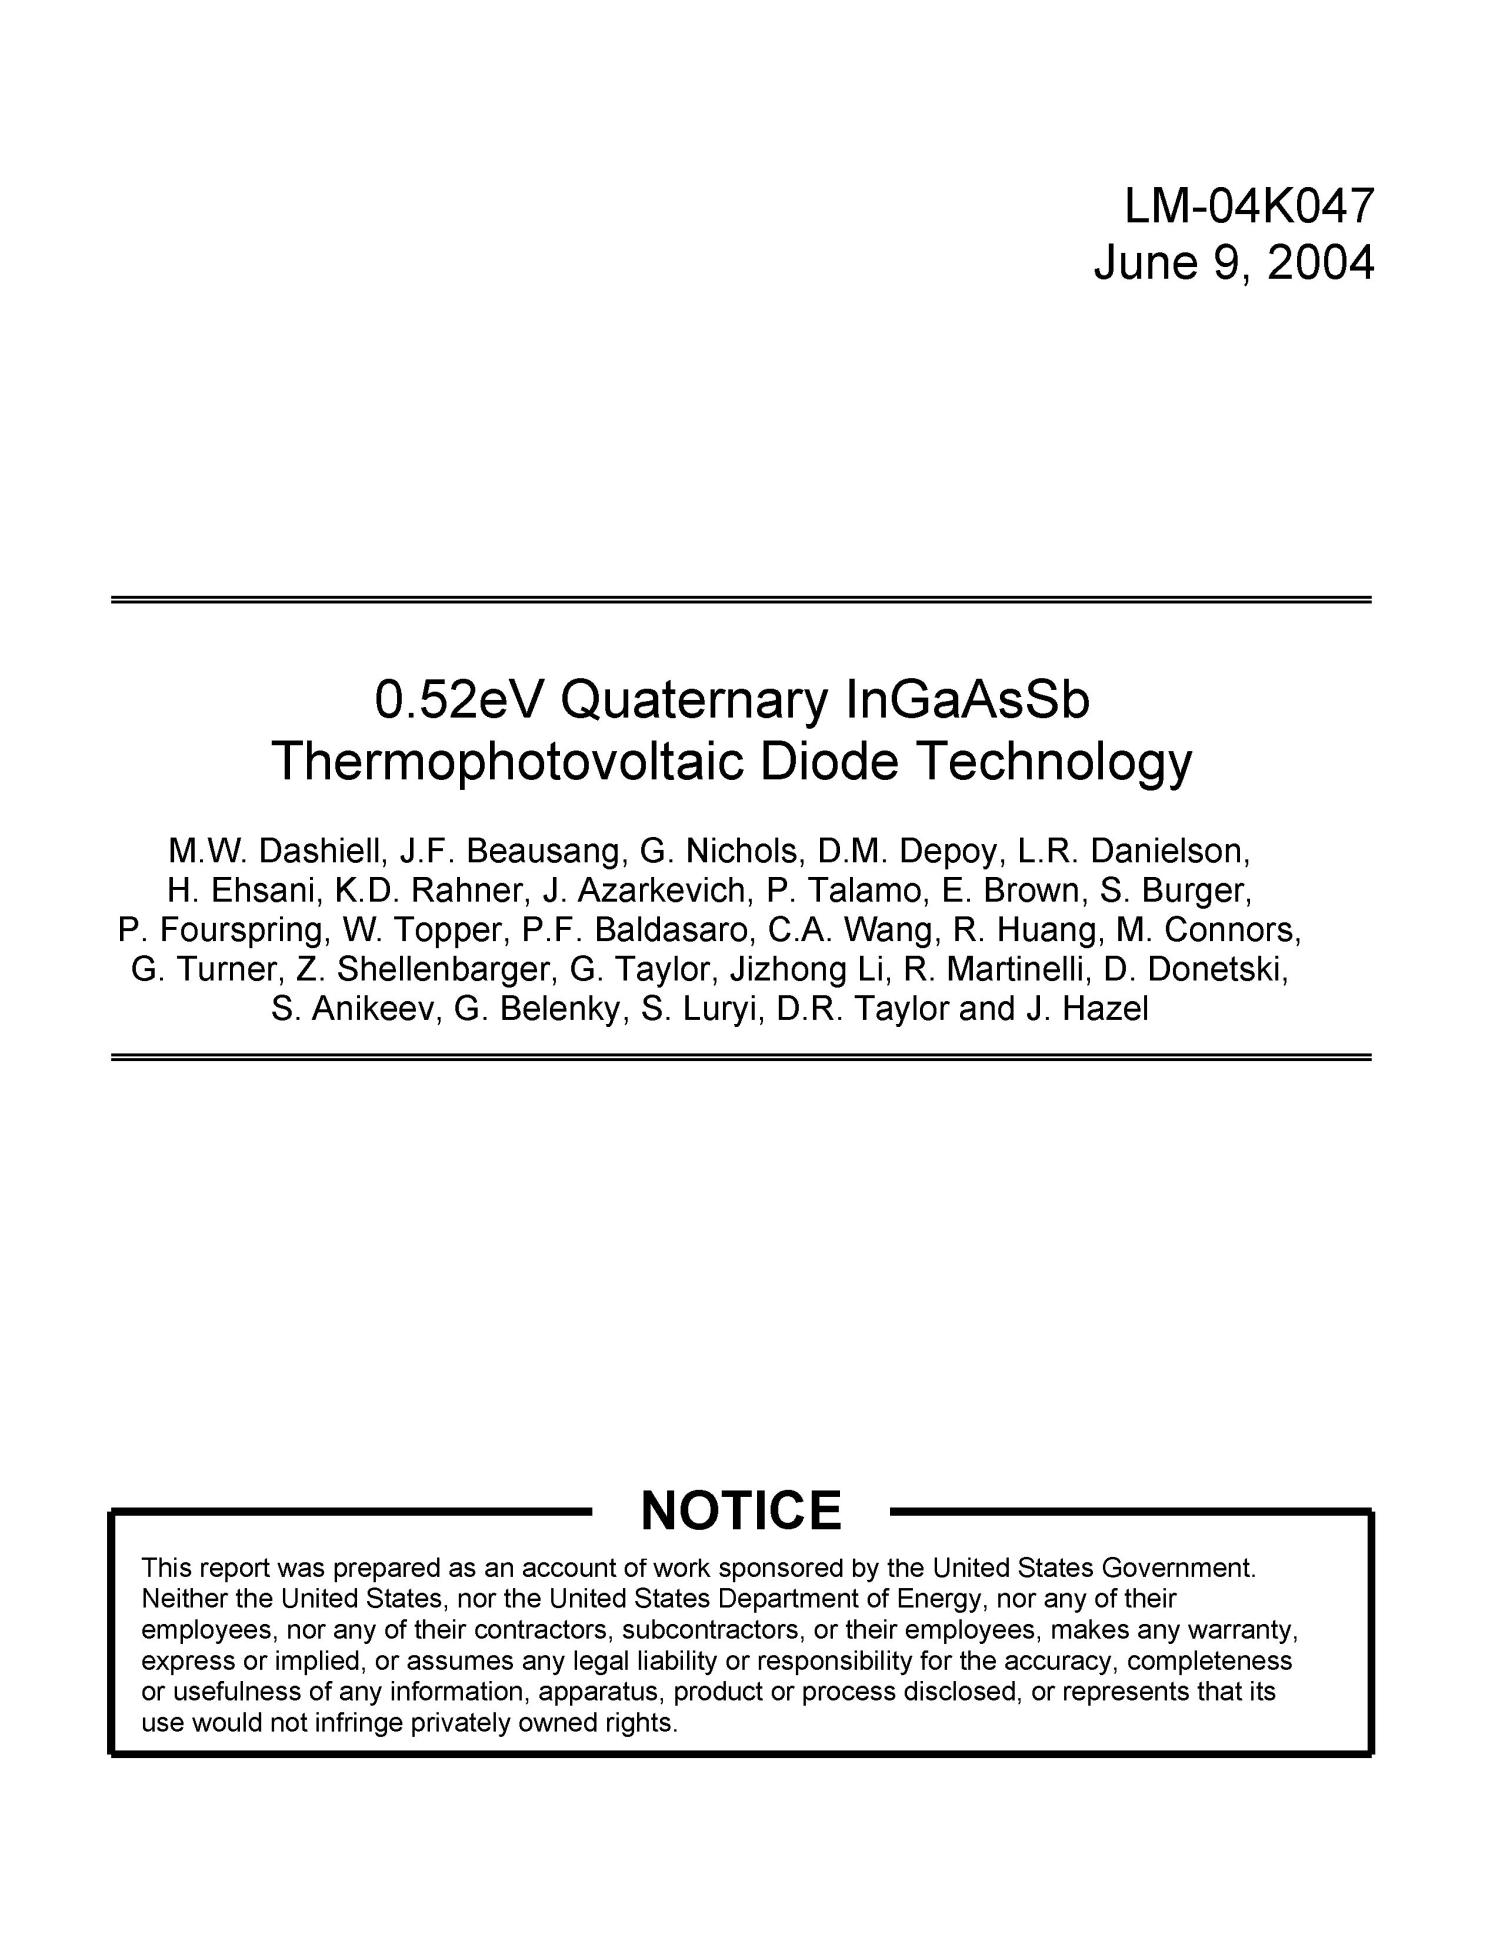 0.52eV Quaternary InGaAsSb Thermophotovoltaic Diode Technology
                                                
                                                    [Sequence #]: 1 of 12
                                                